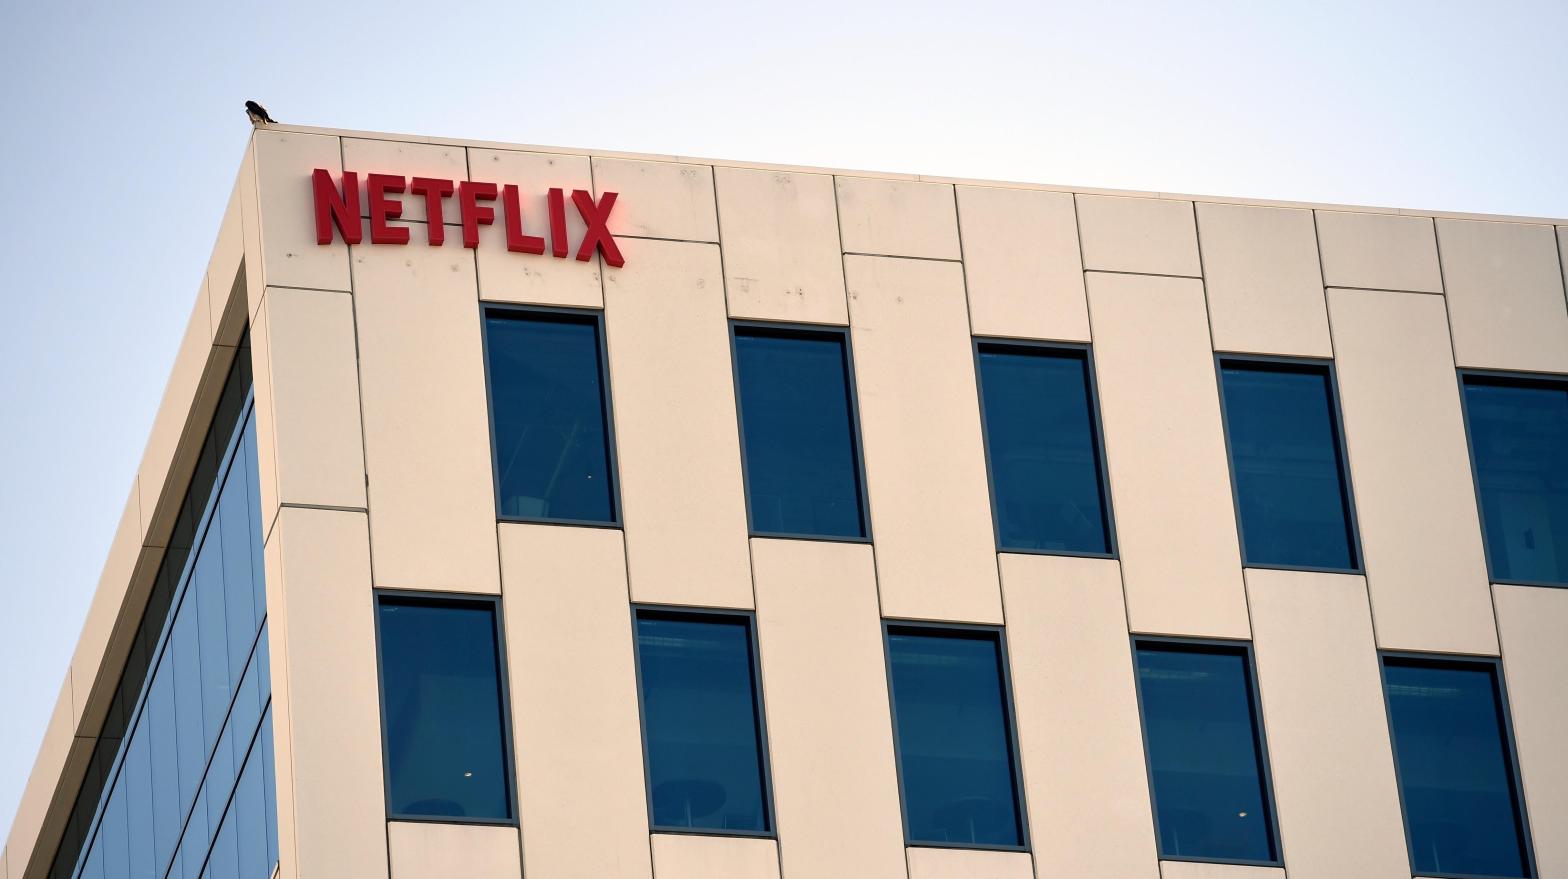 Netflix is more than ready to expand its advertising business, even promising it can do away with one of the most annoying aspects of ads on streaming services. (Photo: Chris Pizzello, AP)